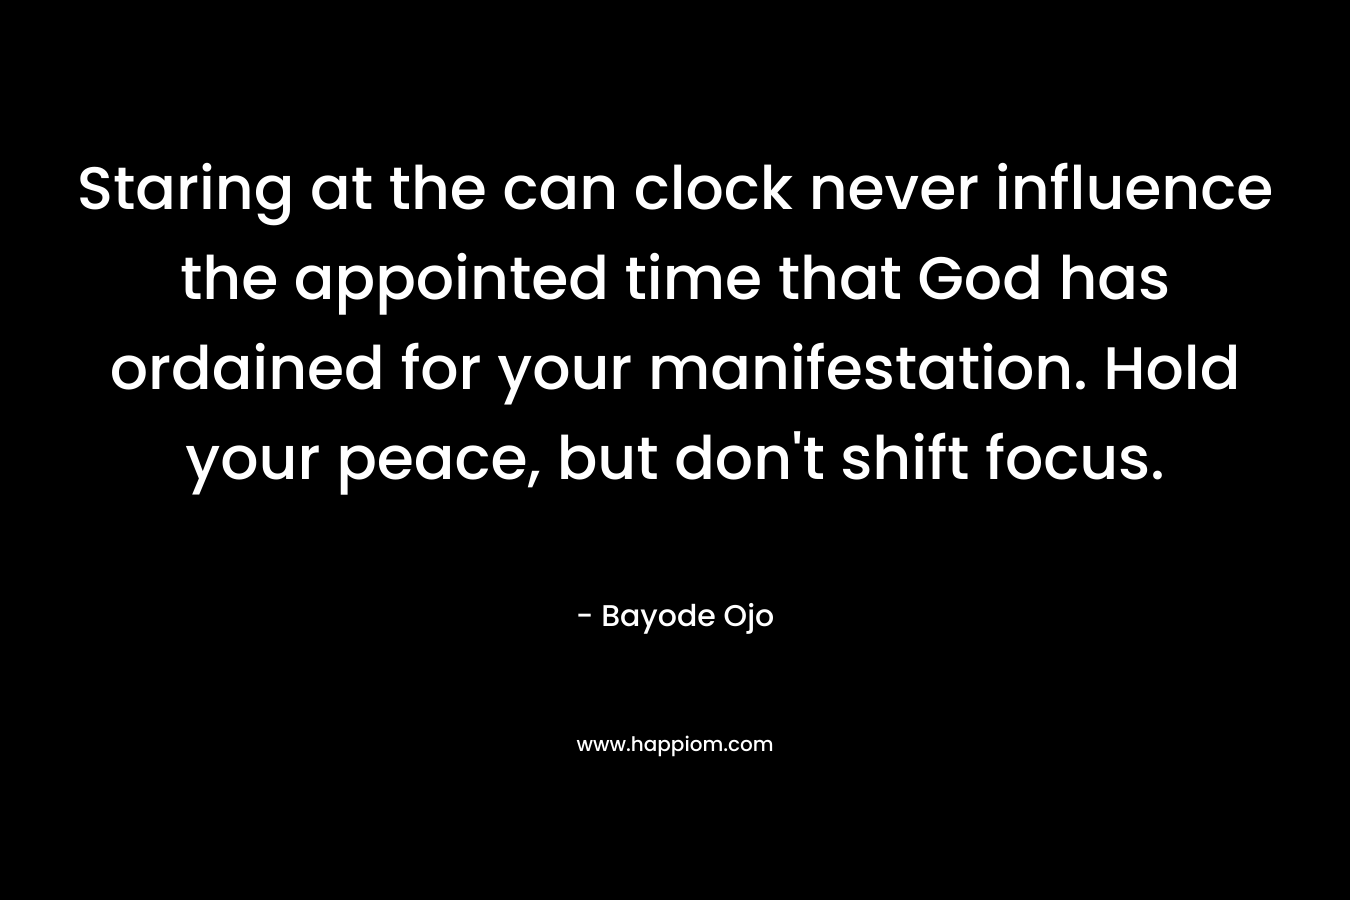 Staring at the can clock never influence the appointed time that God has ordained for your manifestation. Hold your peace, but don’t shift focus. – Bayode Ojo